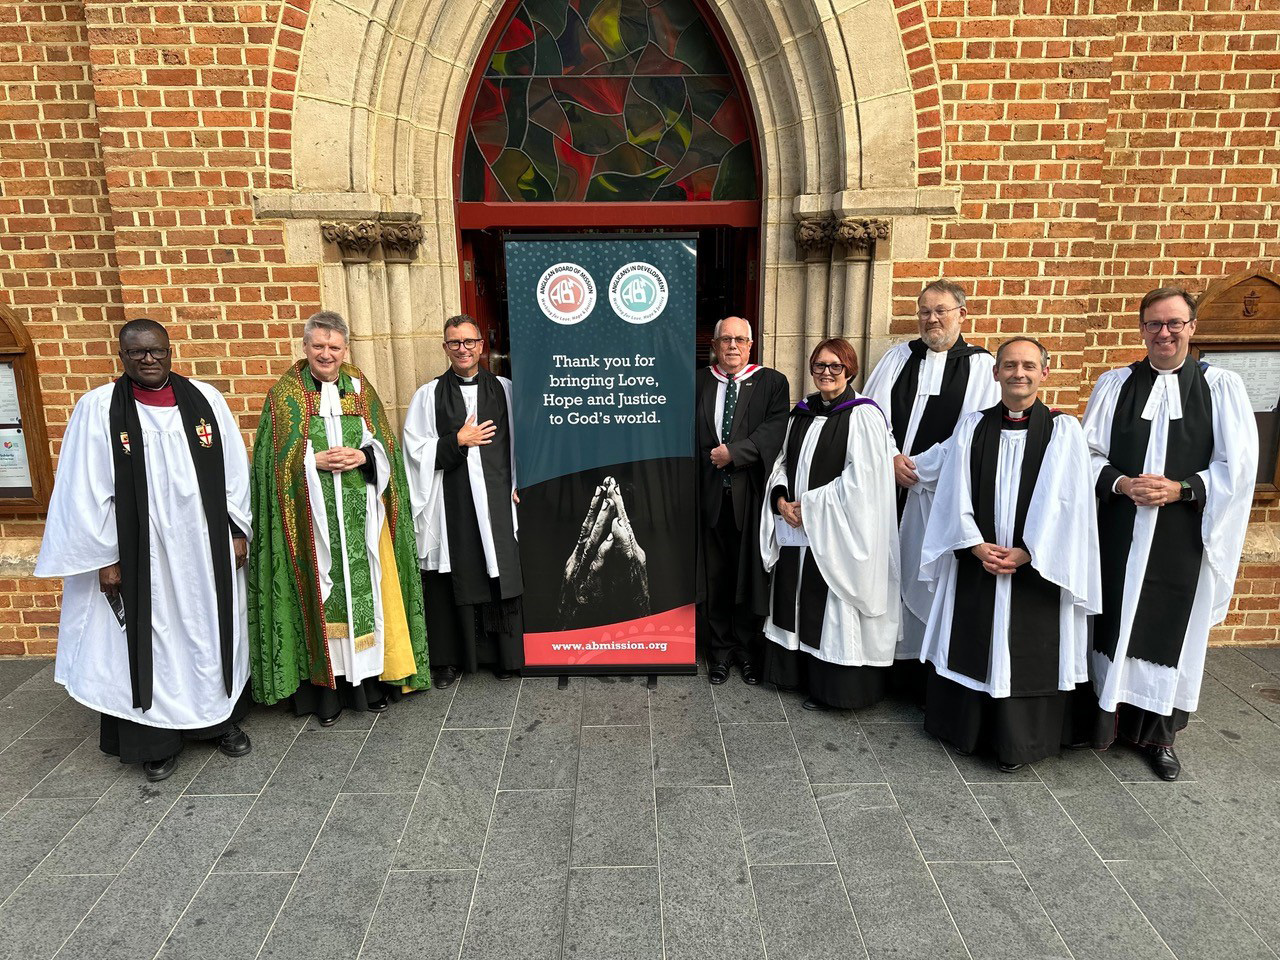 The annual ABM Choral Evensong at St George’s Cathedral, Perth on Sunday 29 October ©Diocese of Perth. Used with permission.